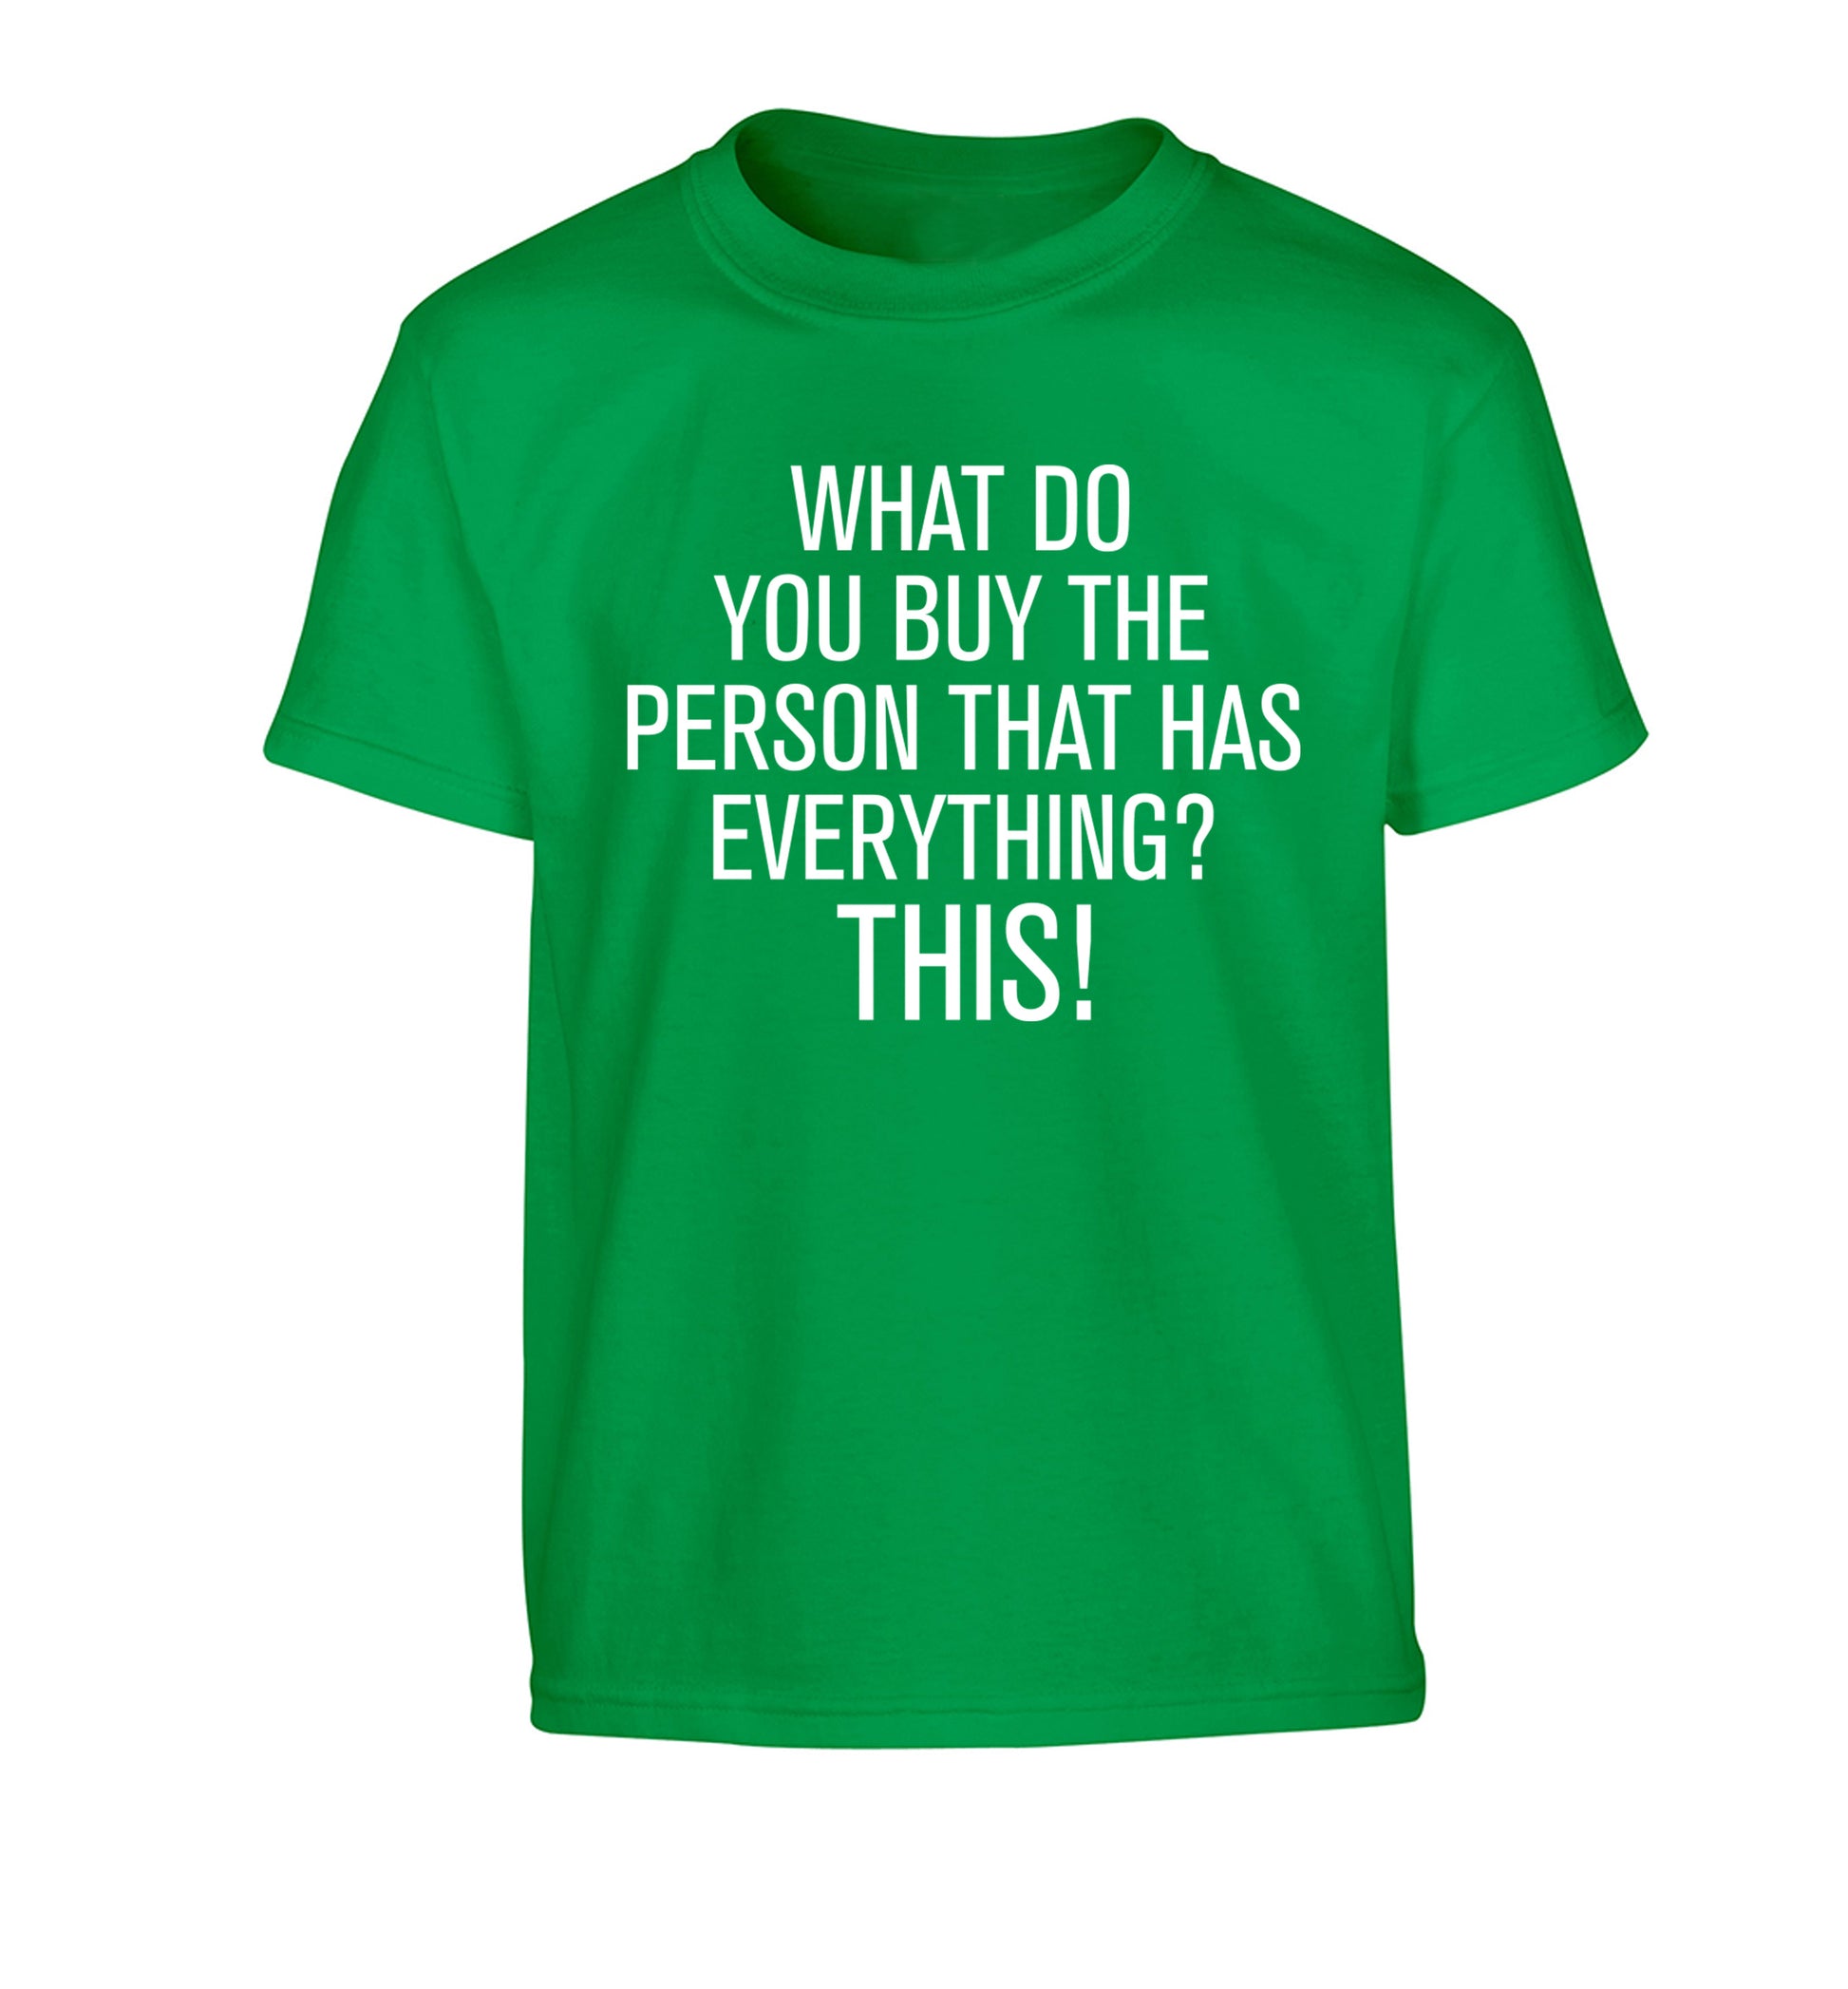 What do you buy the person that has everything? This! Children's green Tshirt 12-13 Years